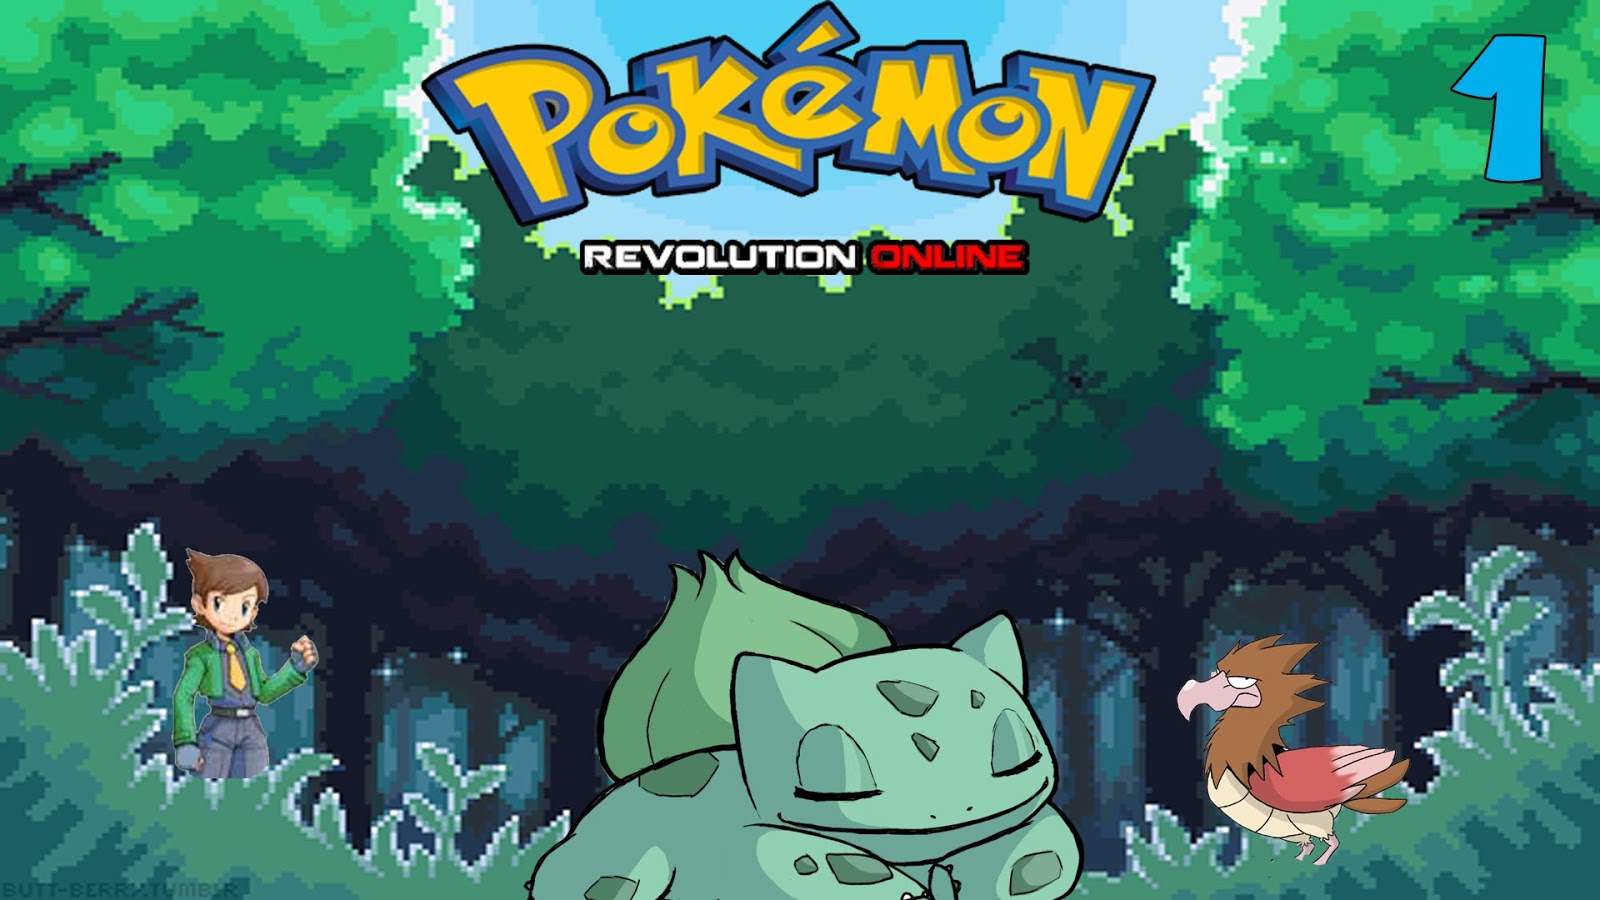 Pokemon Games Online - Play Online or Download 